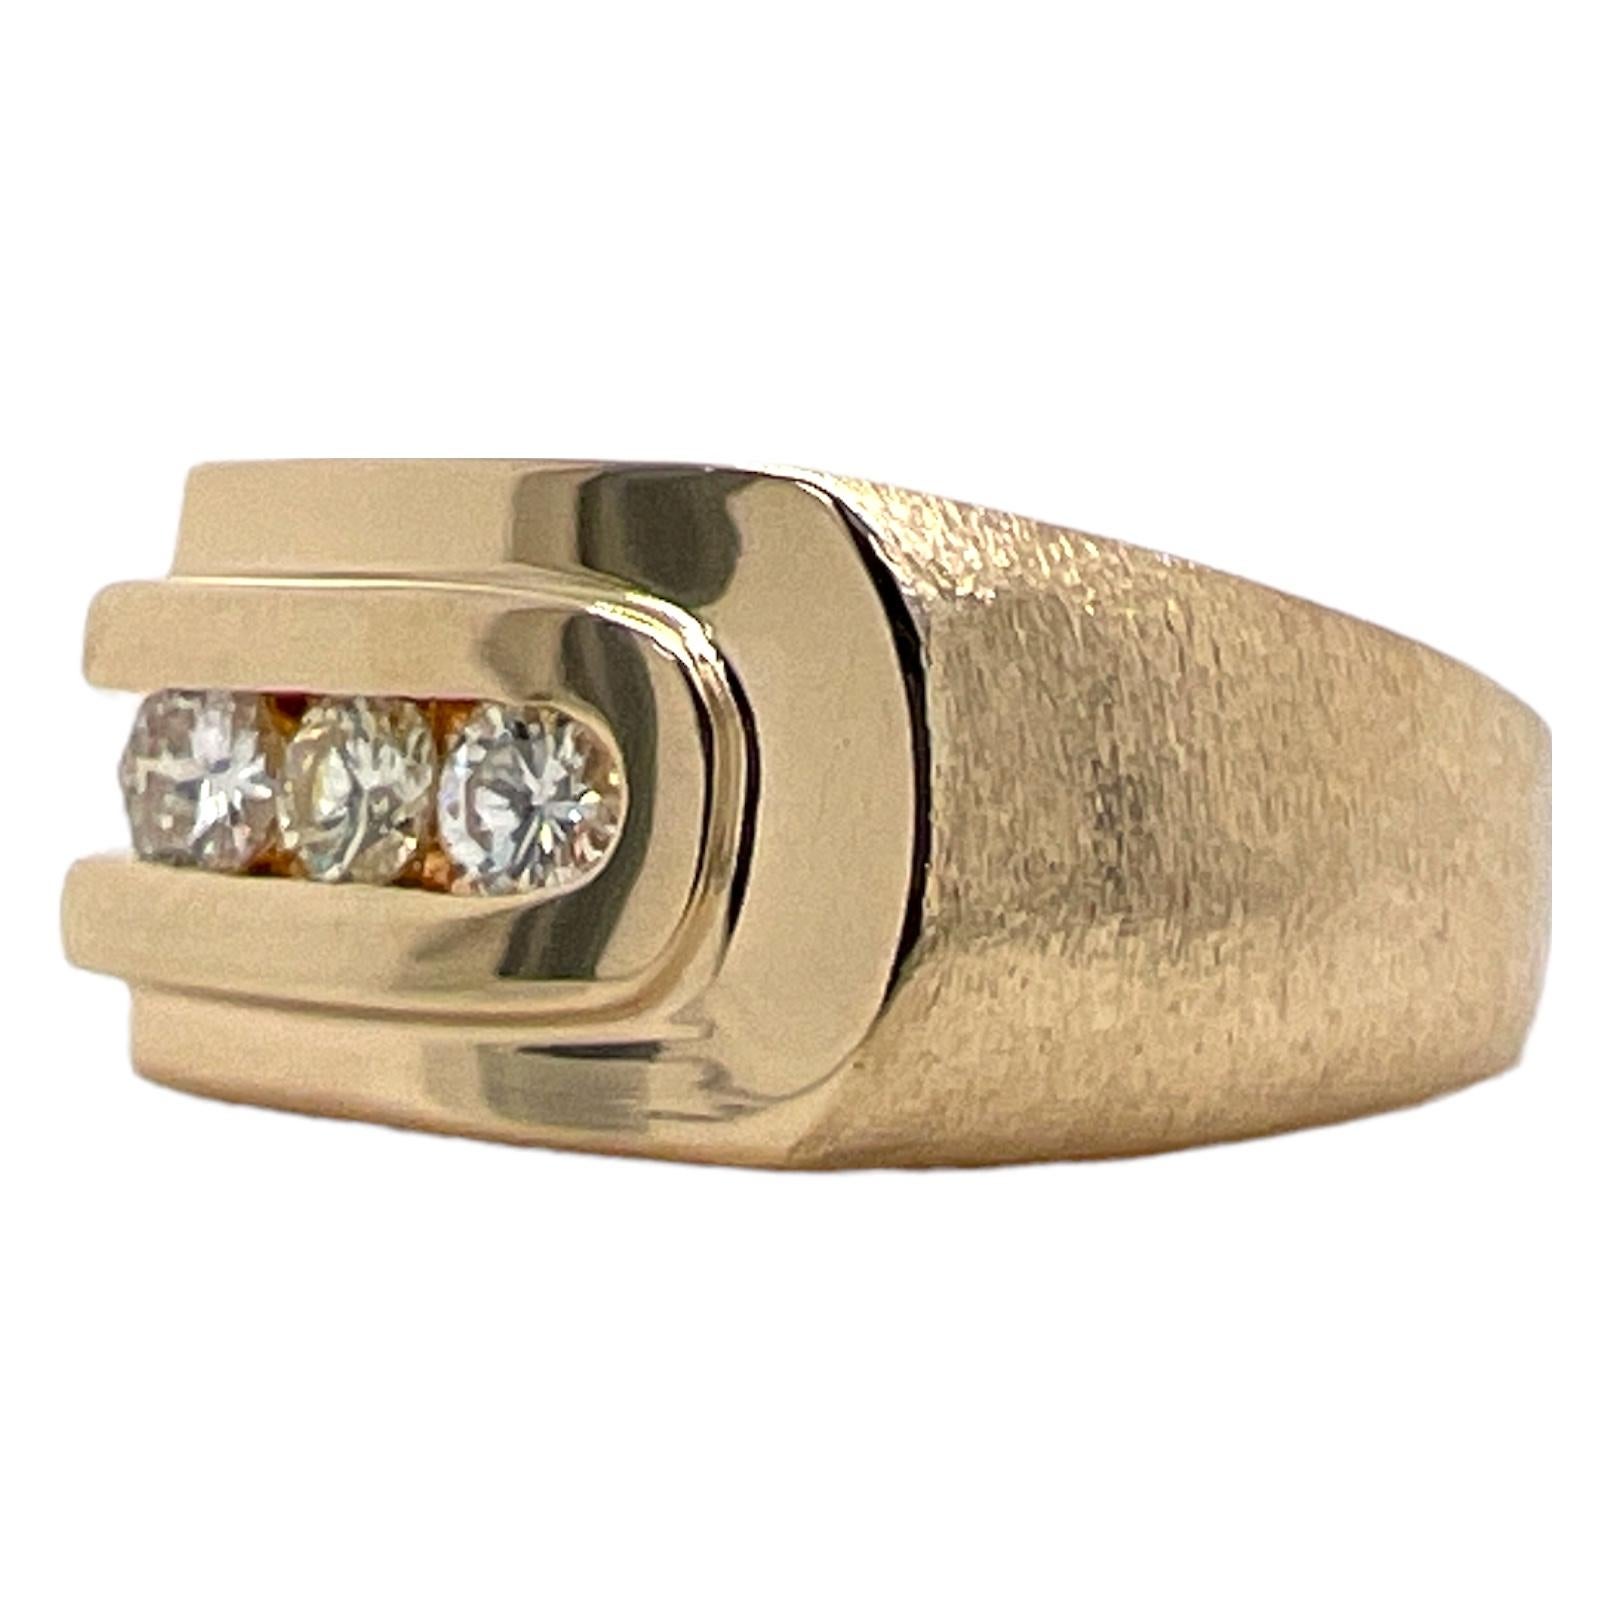 Gents three diamond band ring fashioned in 14 karat satin finish and high polish yellow gold. The ring features 3 round brilliant cut diamonds weighing approximately .45 CTW and graded J color and VS clarity. The band measures 3.5- 10mm, and is